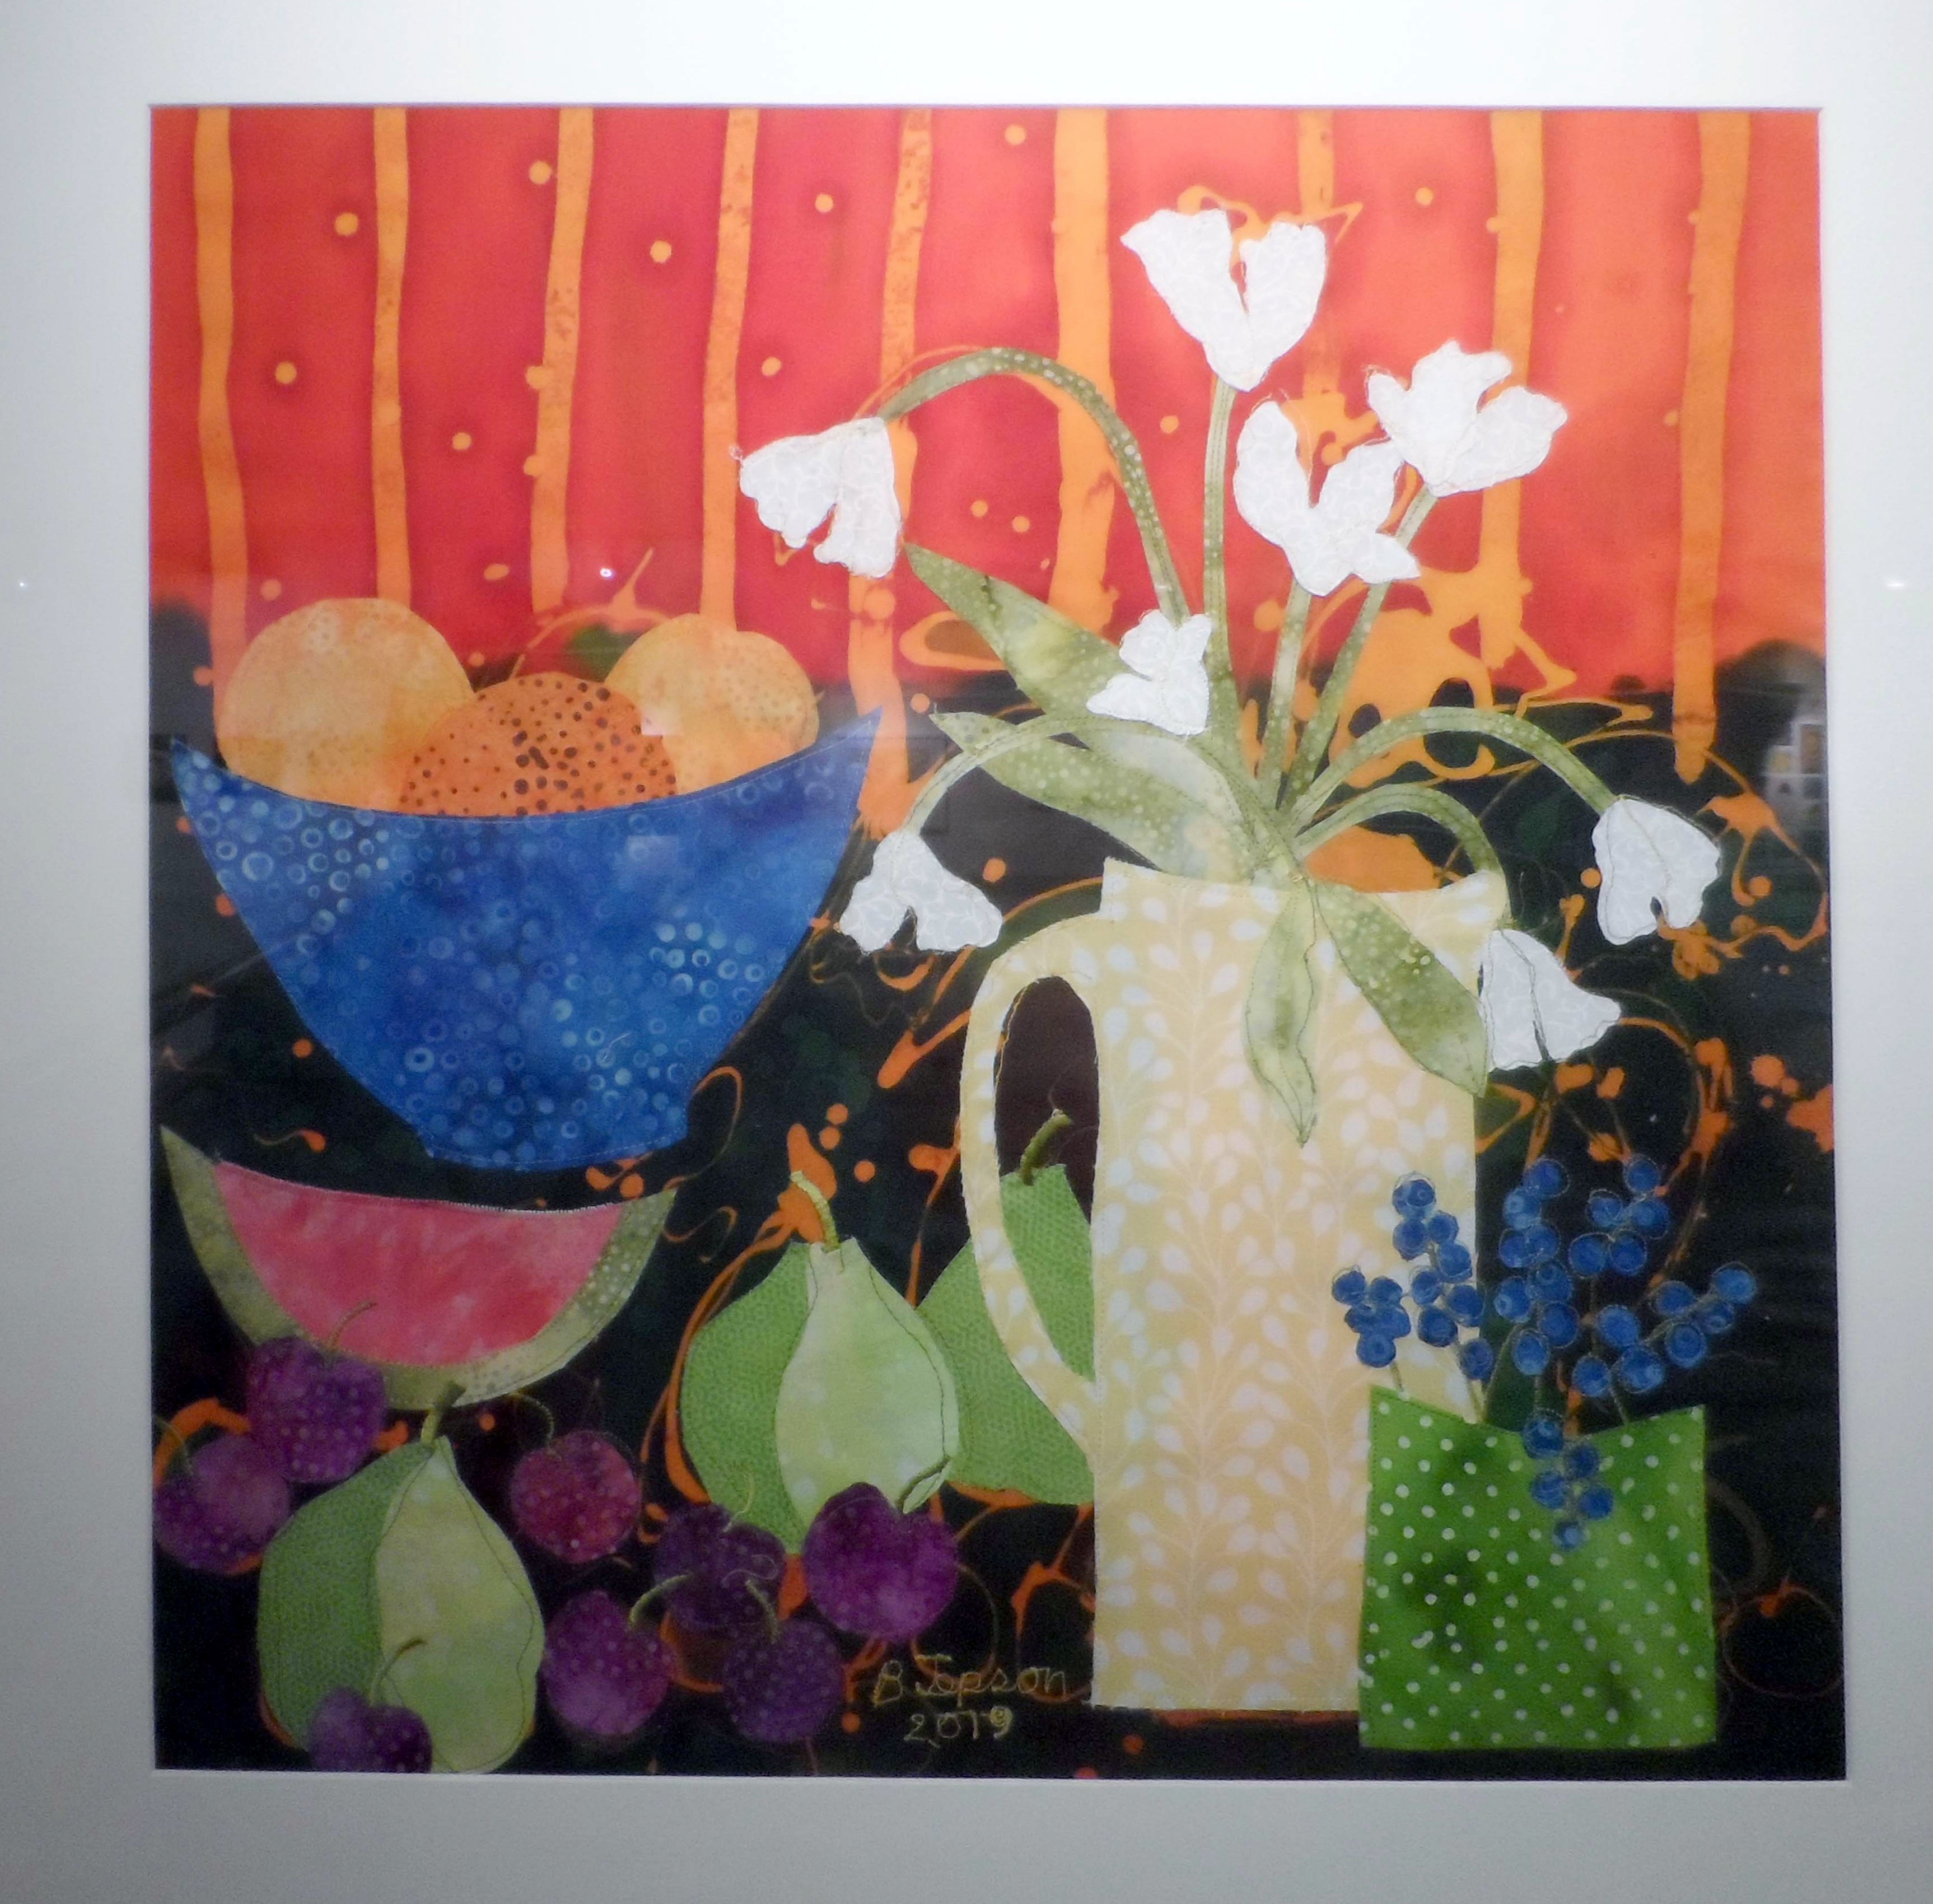 FLOWERS AND FRUIT by Barbara Jepson, batik and applique